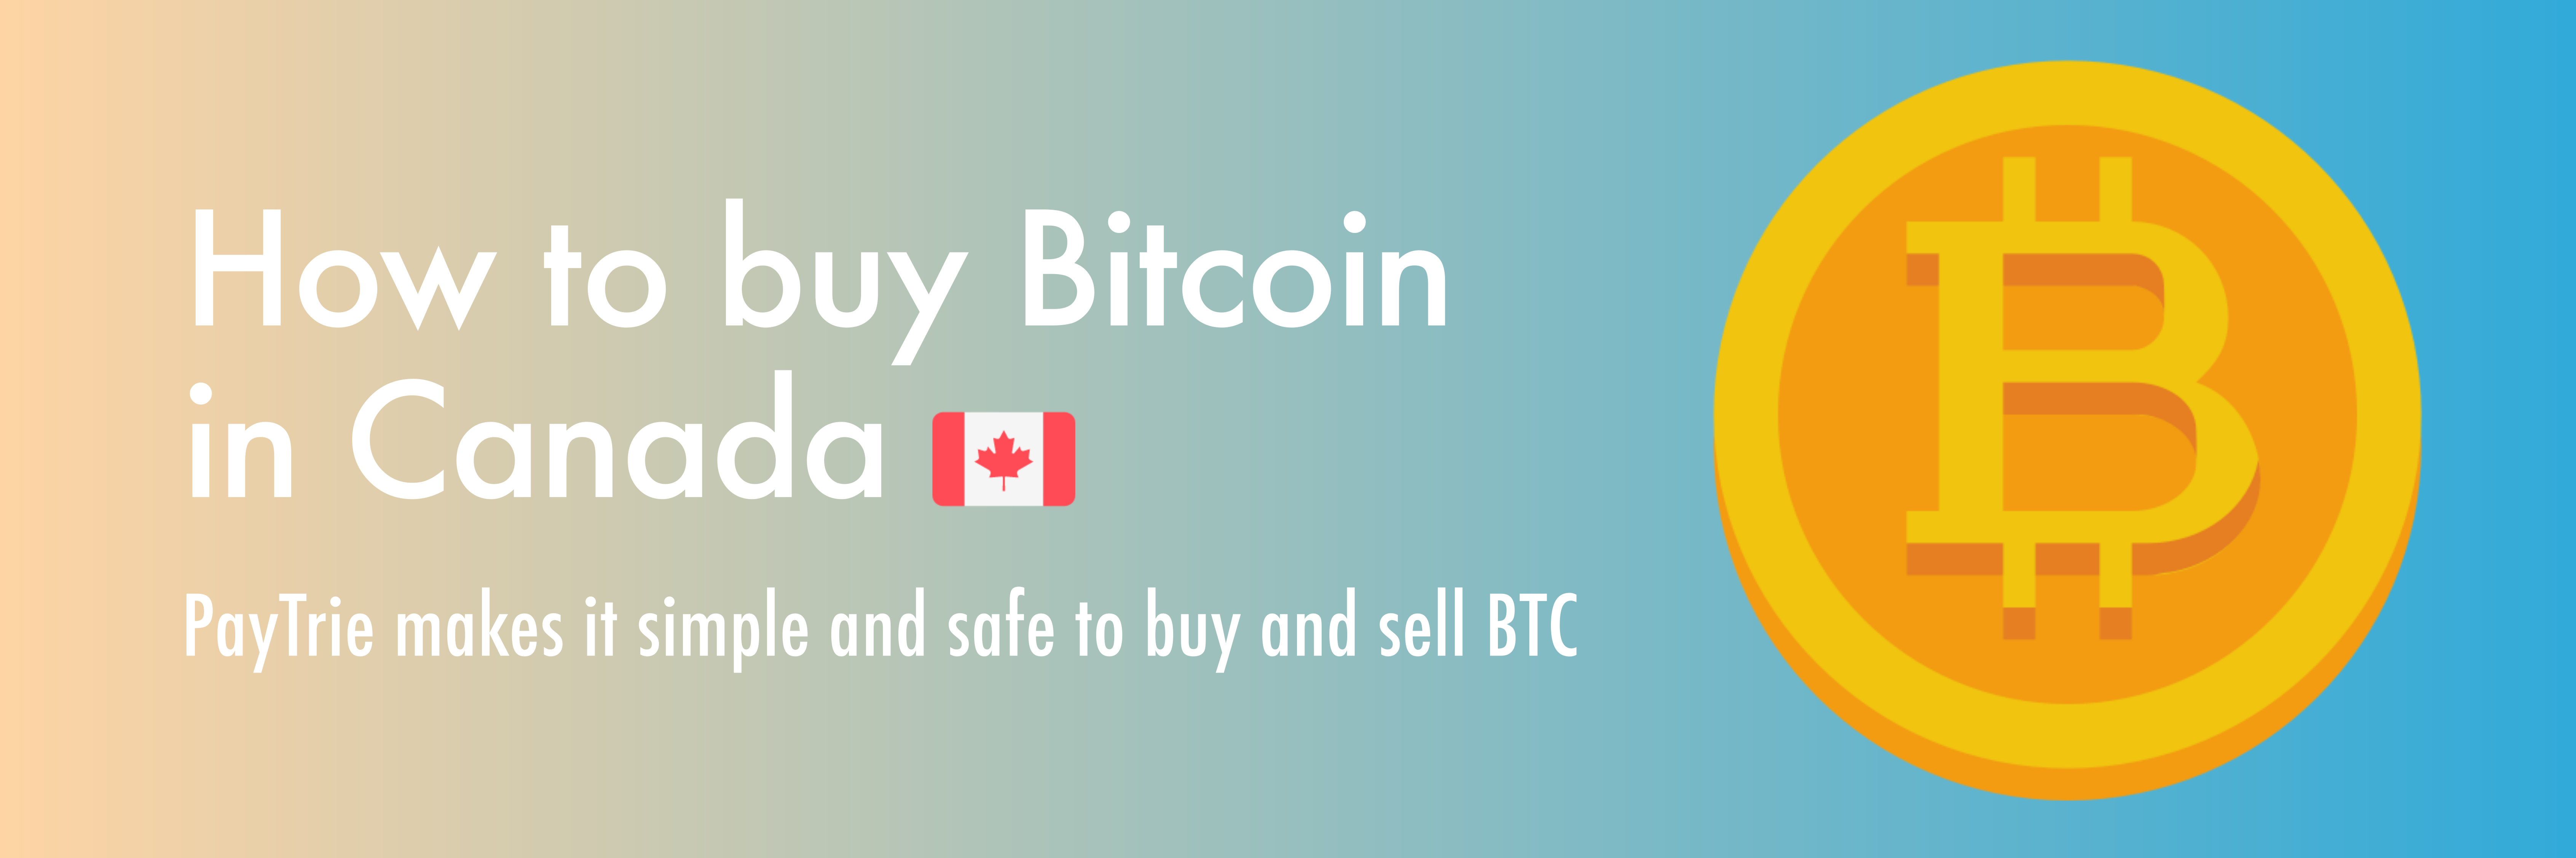 is bitcoin legal in canada